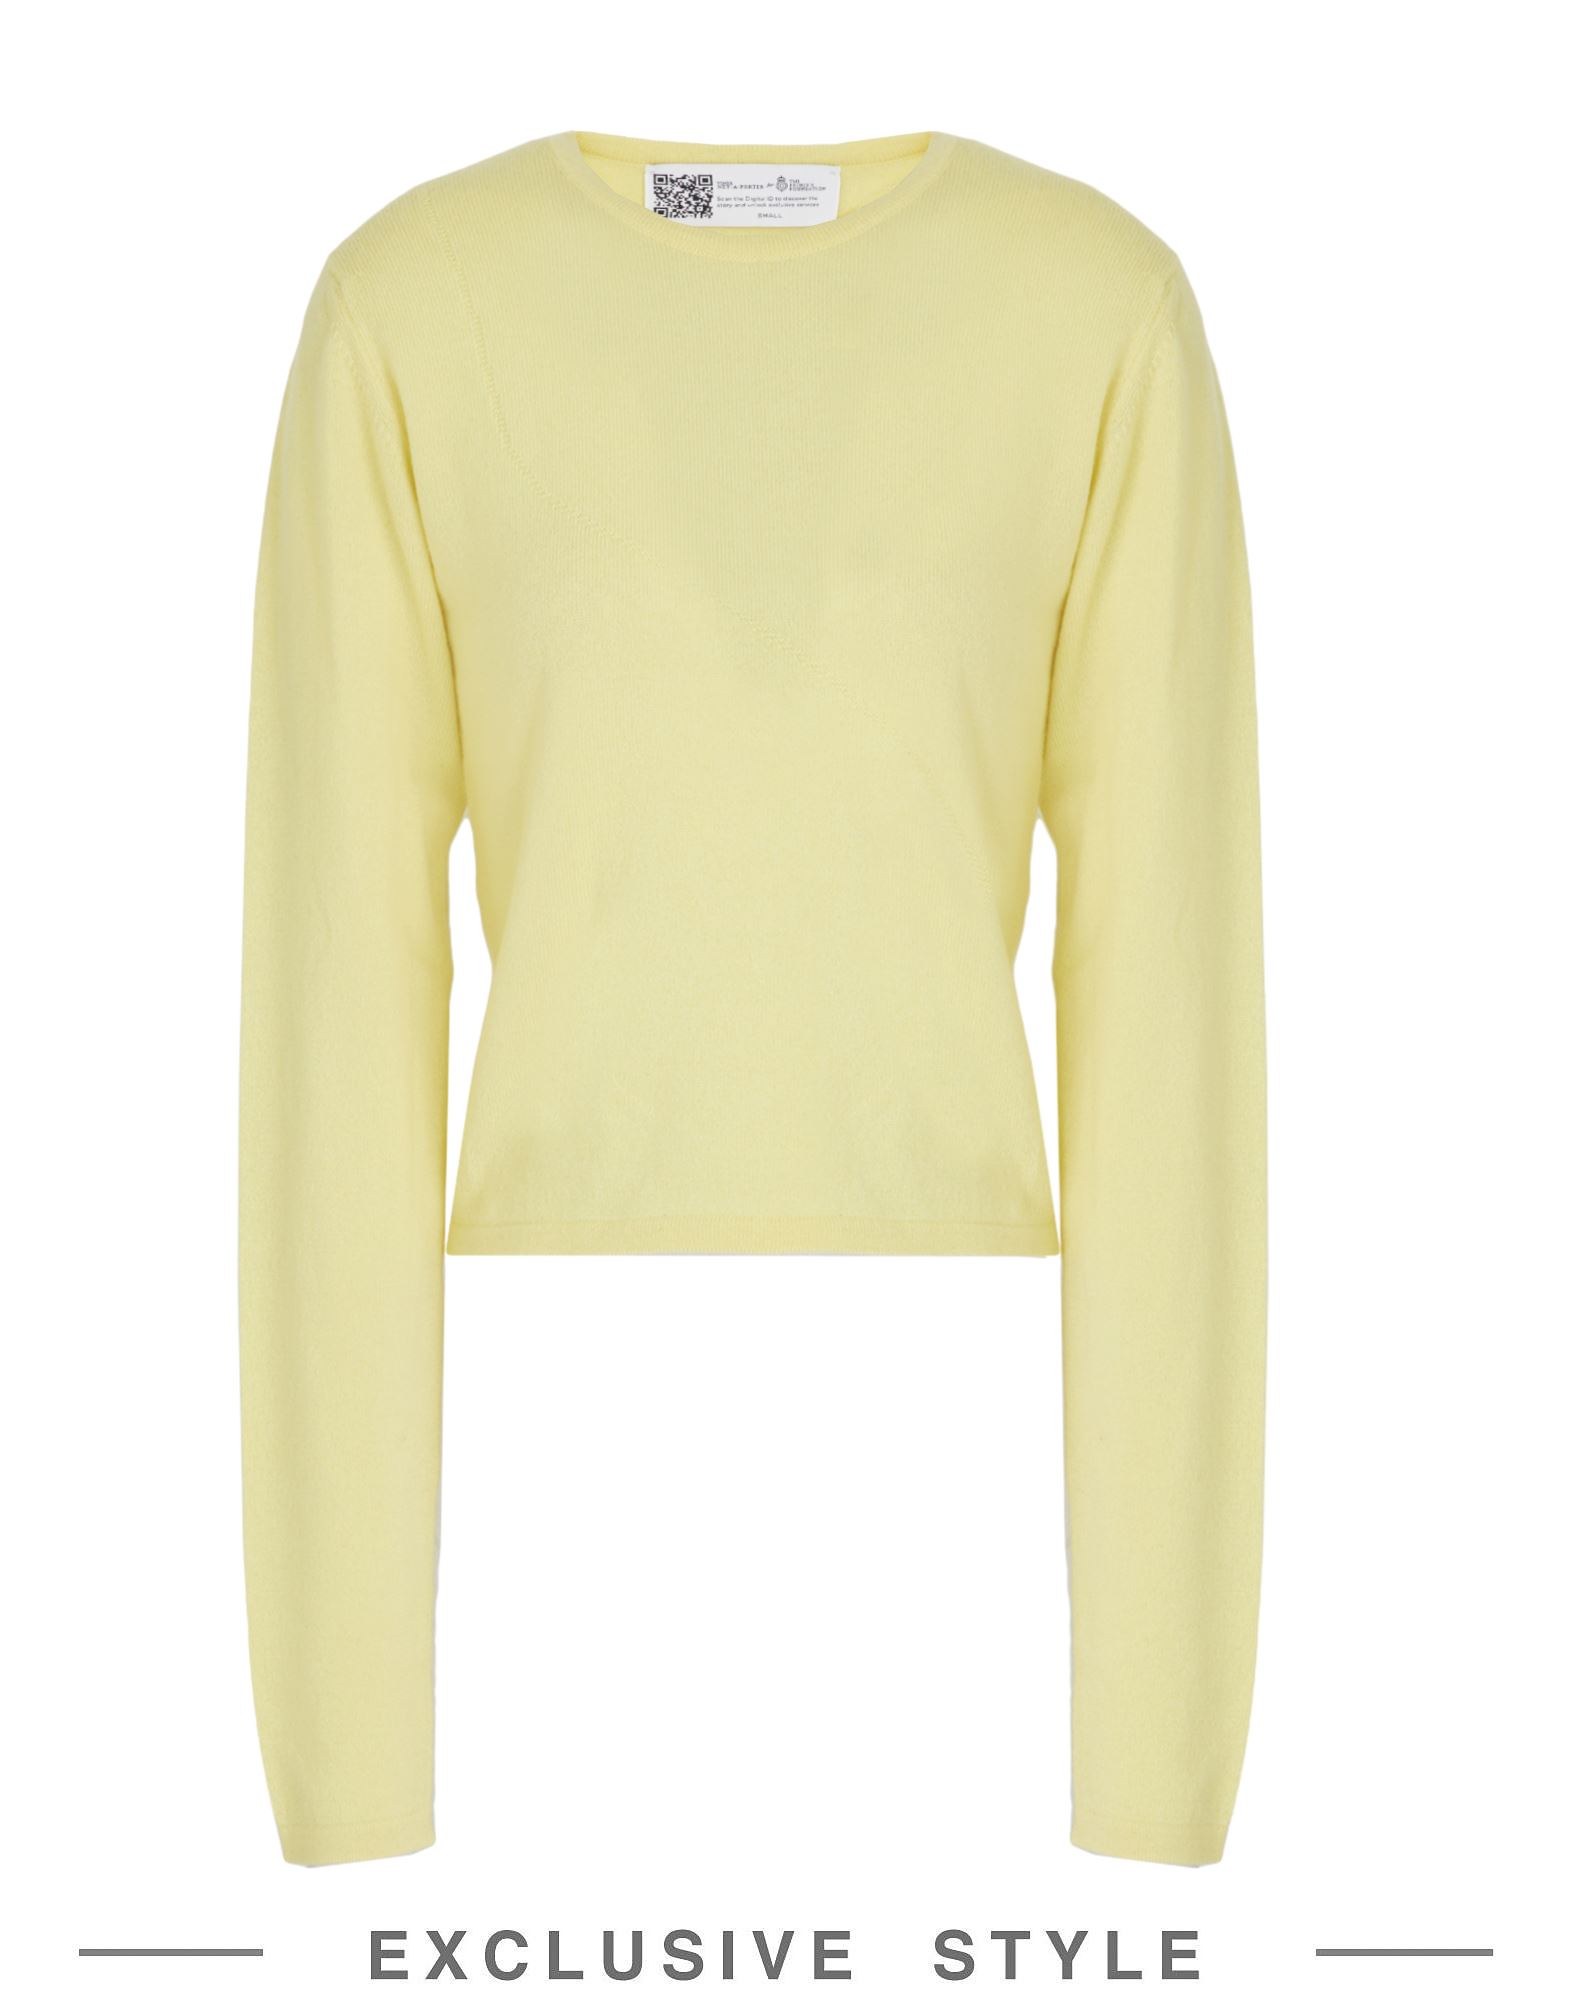 Yoox Net-a-porter For The Prince's Foundation Sweaters In Yellow